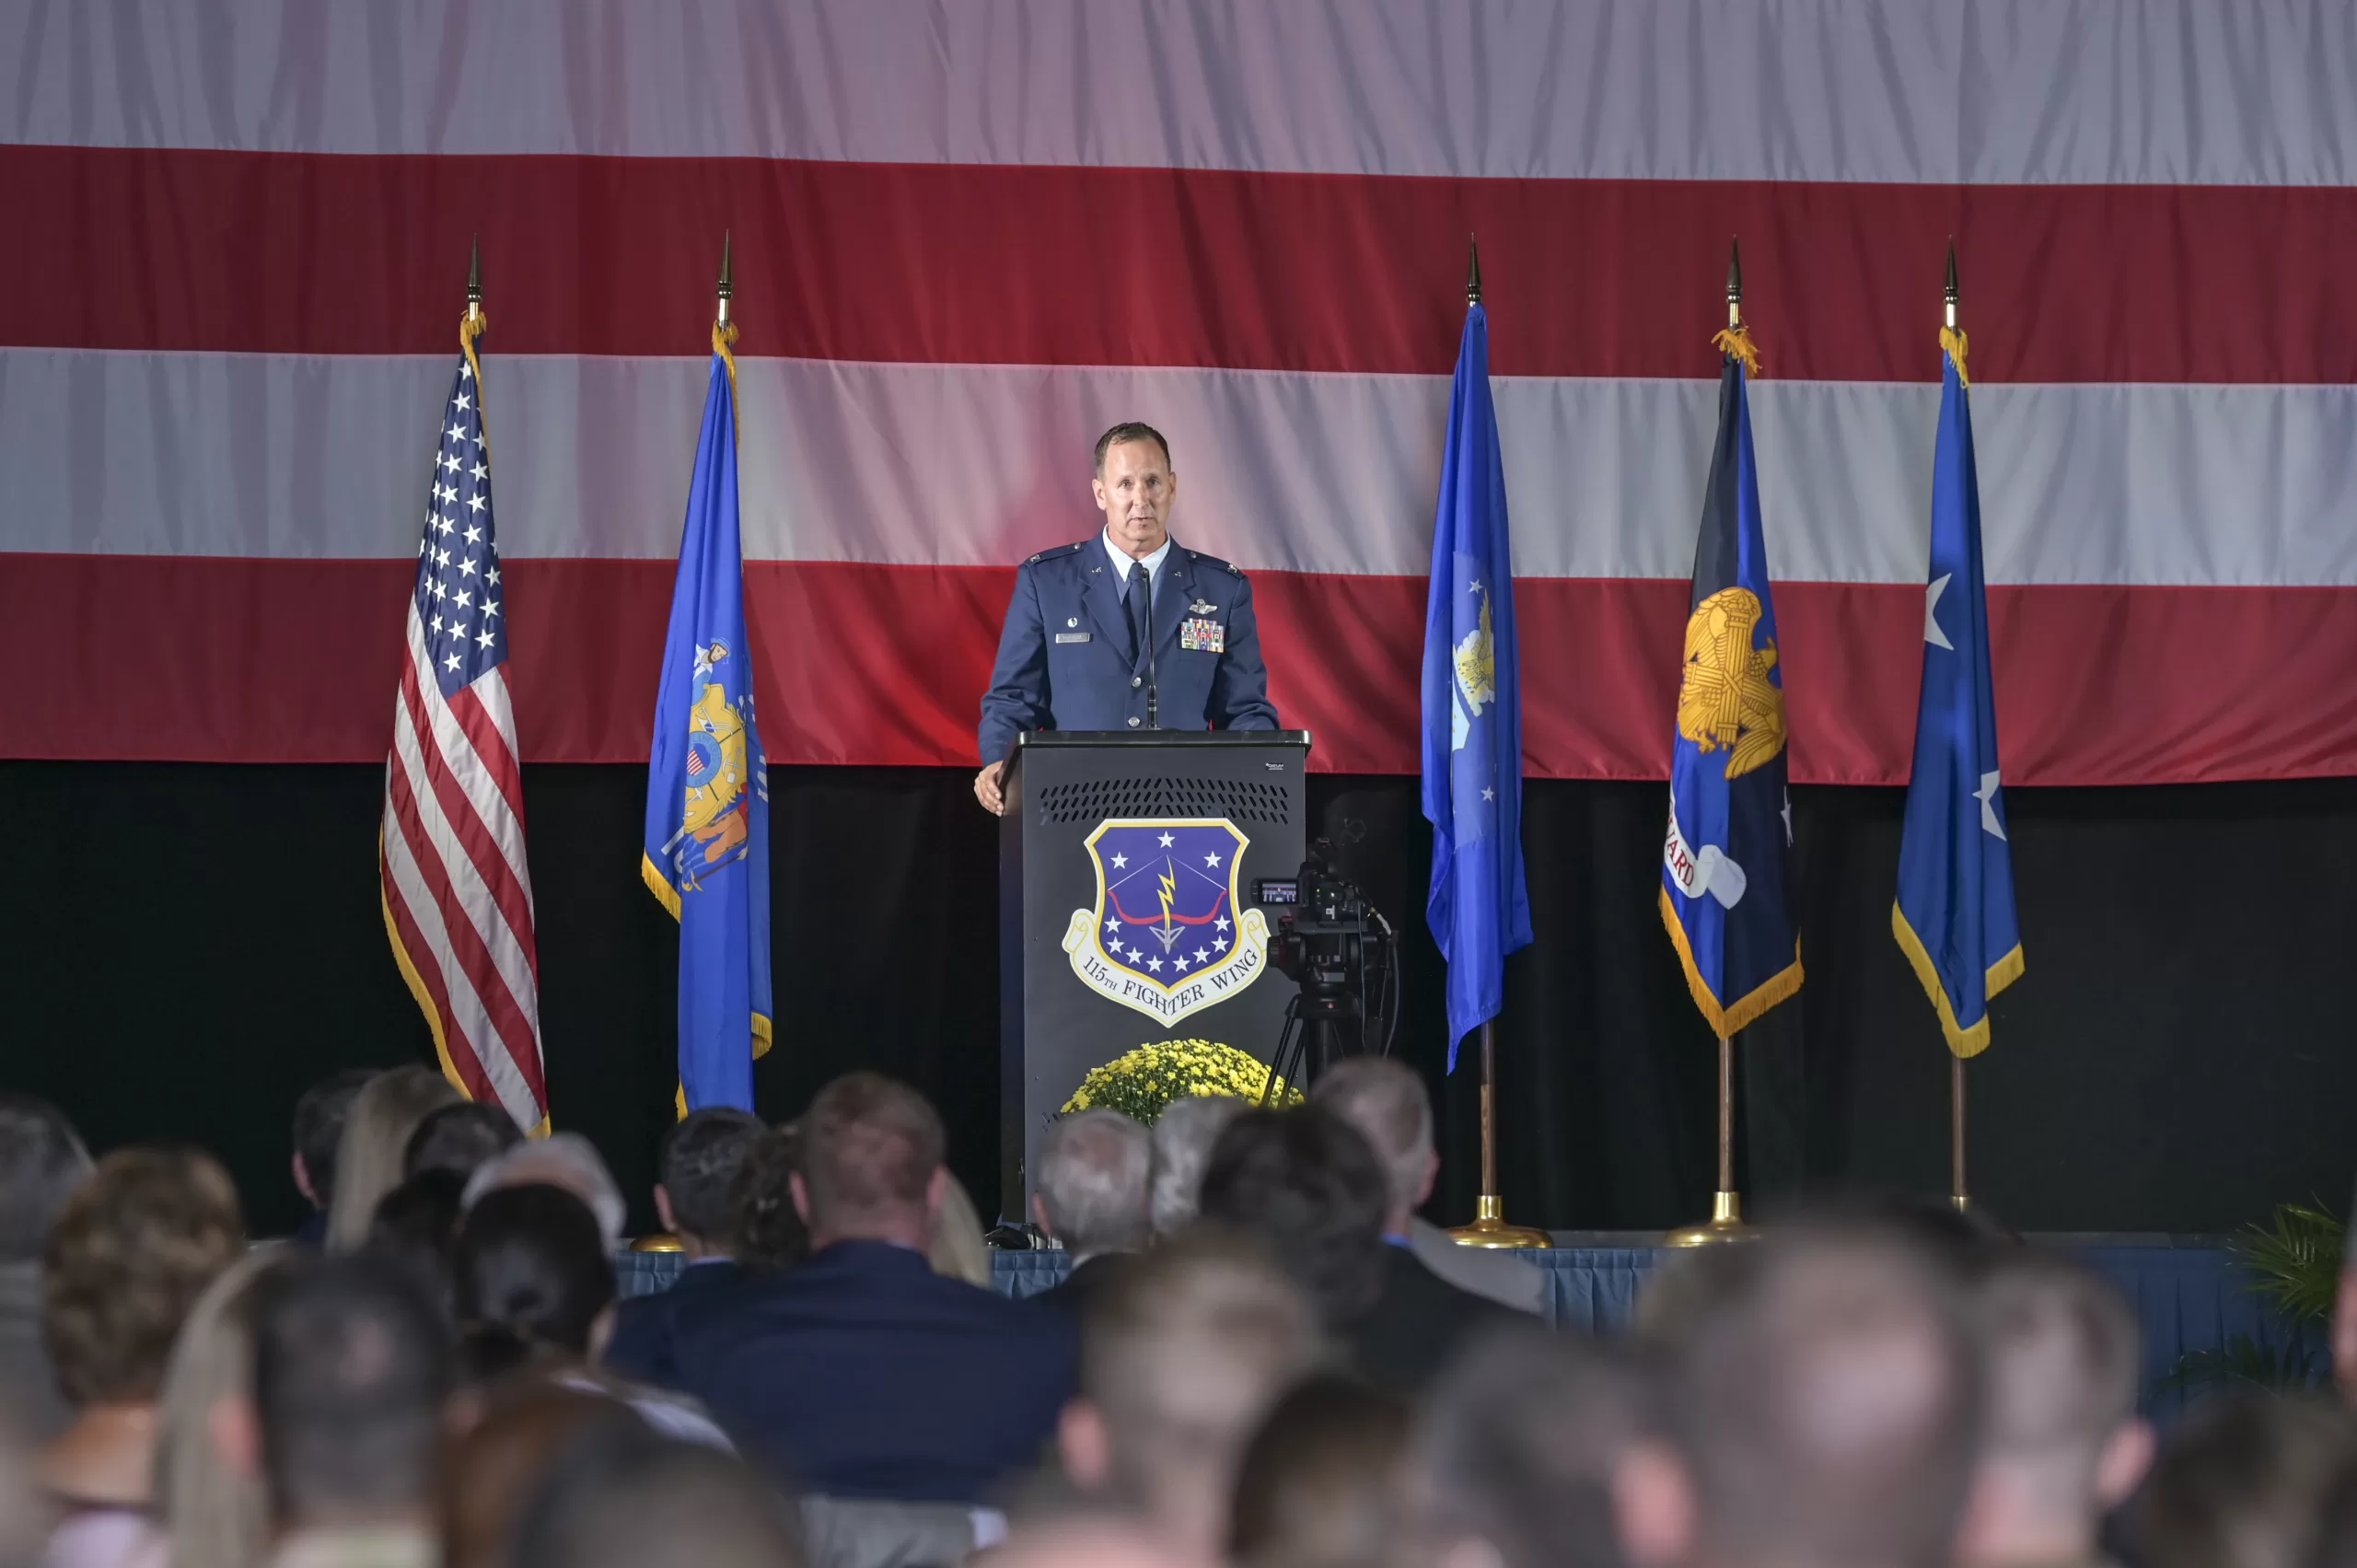 Col. Bart Van Roo, commander of the Wisconsin Air National Guard’s 115th Fighter Wing in Madison, Wis., speaks during a Sept. 7 ceremony to commemorate the fighter wing formally accepting the F-35 Lightning II mission. The 115th is only the second Air National Guard to field the 5th-generation fighter jet. 115th Fighter Wing photo by Tech. Sgt. Cameron Lewis